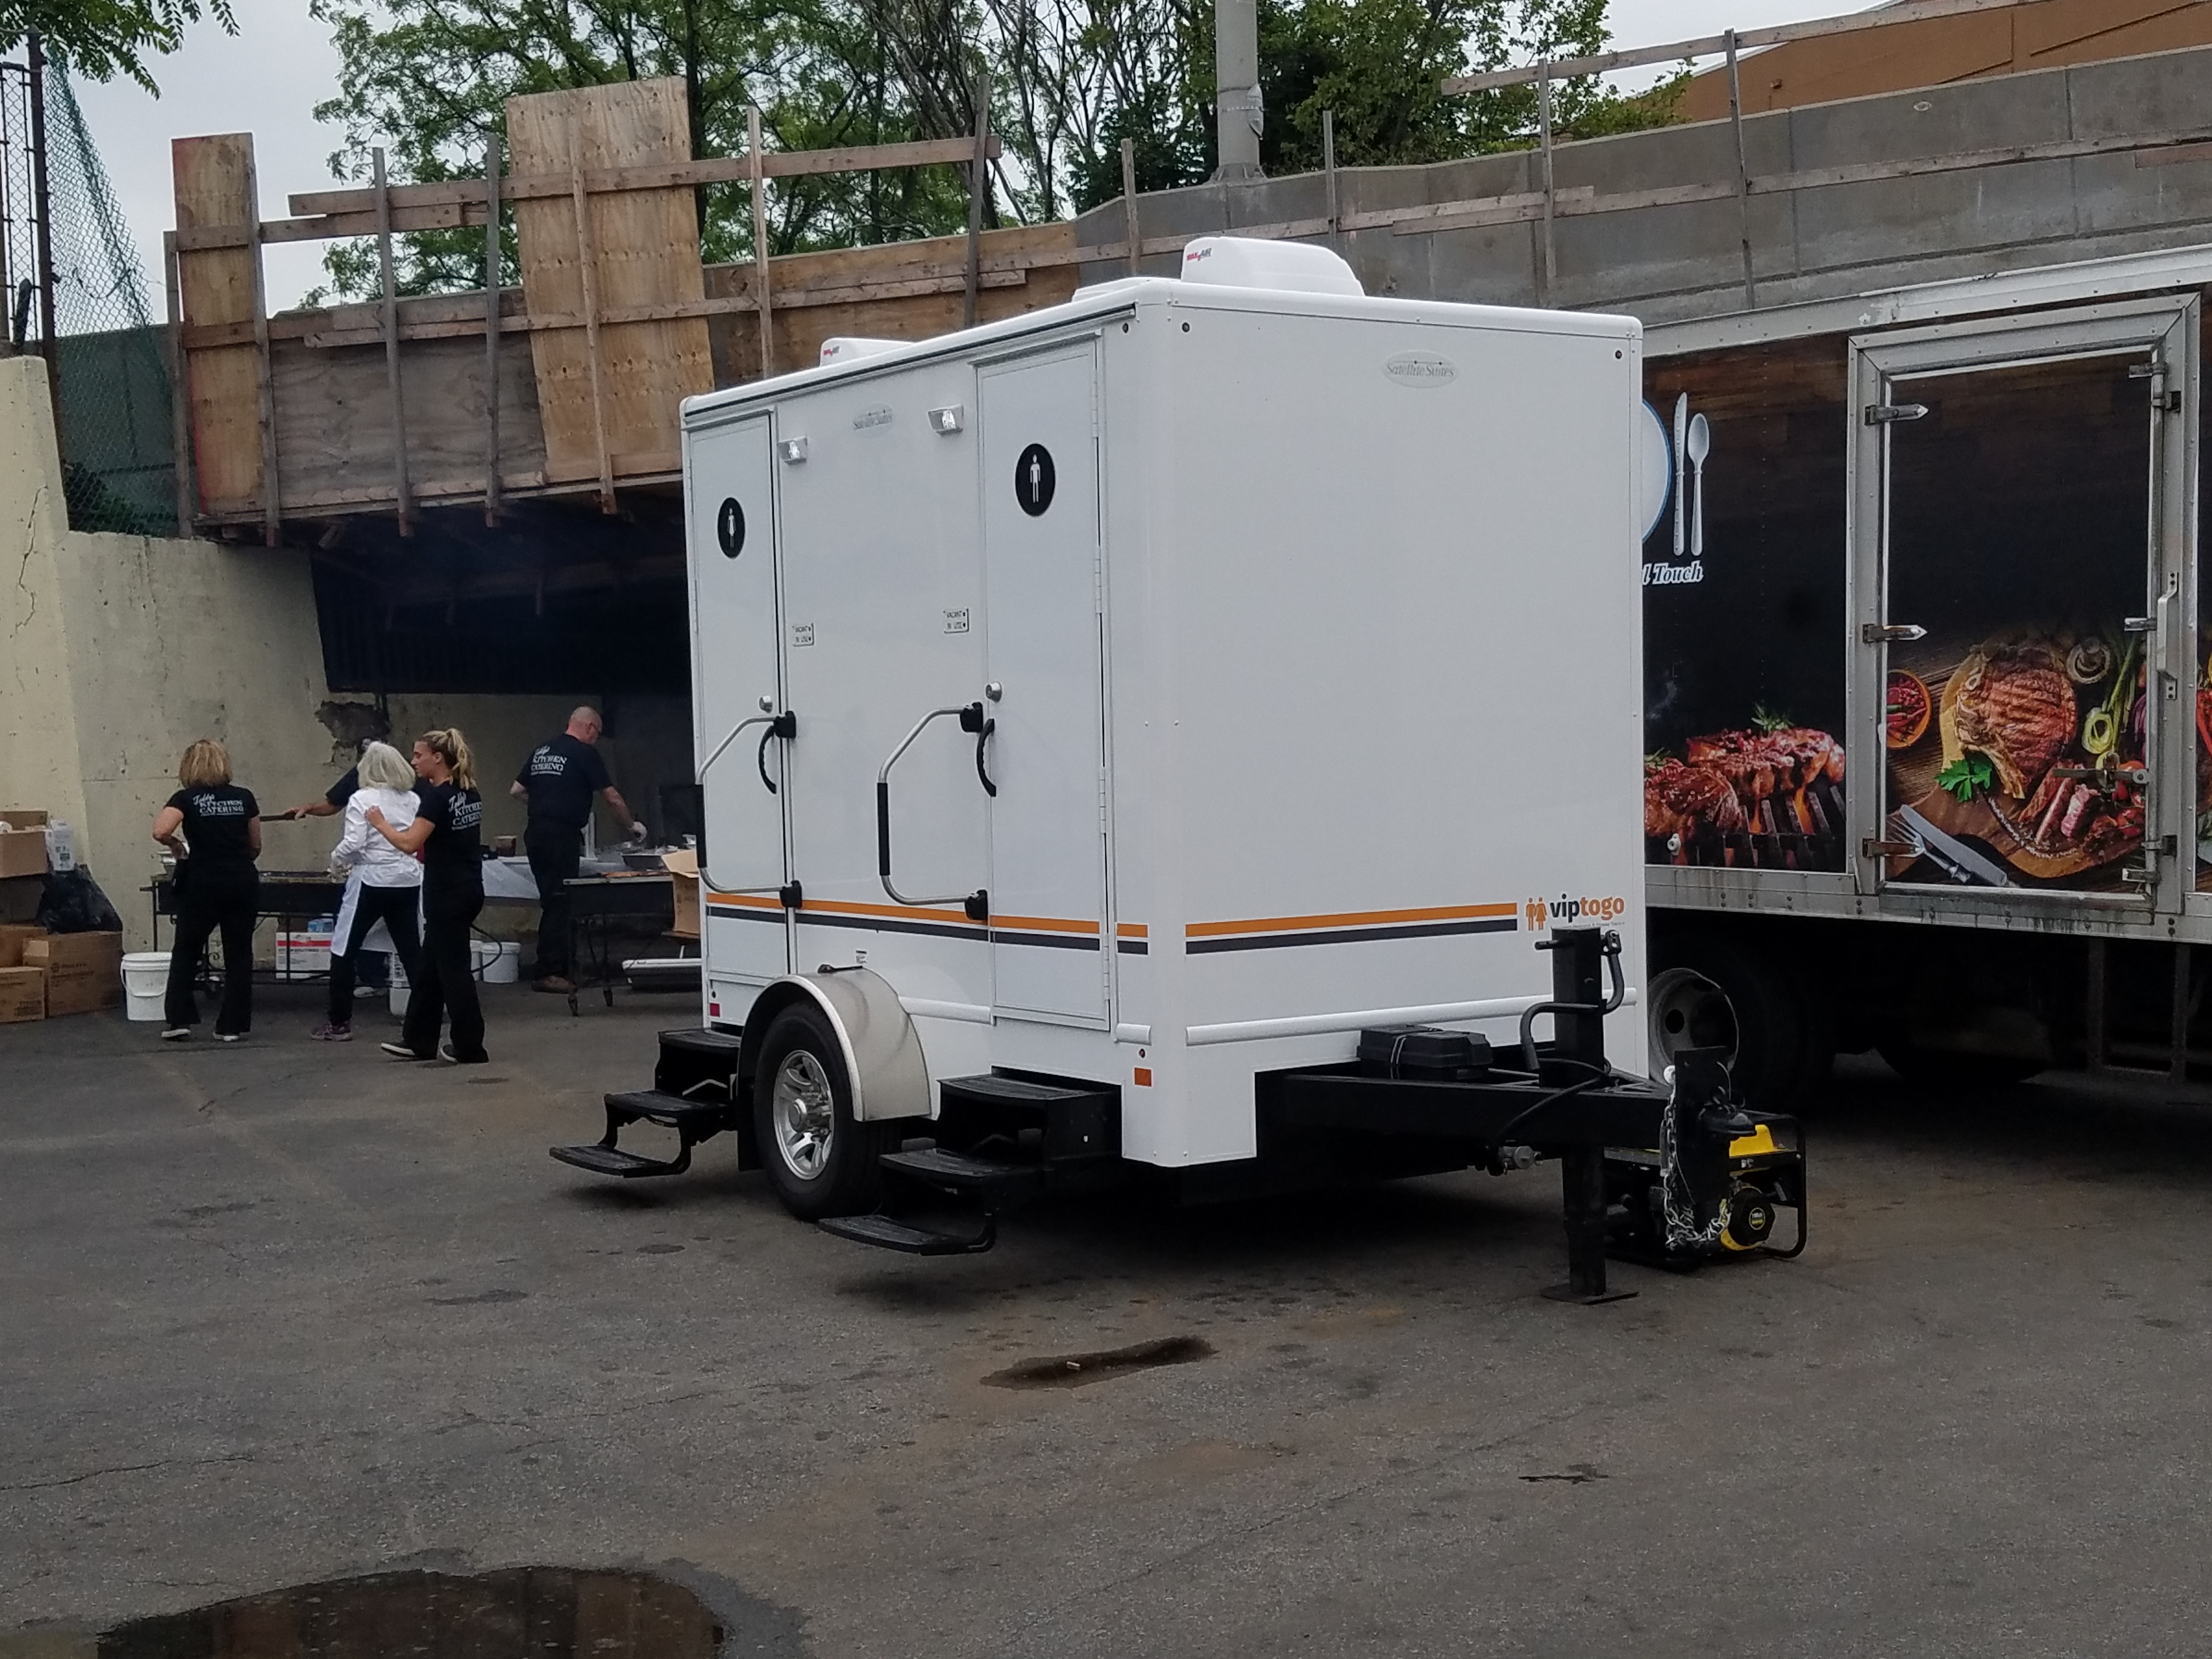 Two Station Rolls Royce Restroom Trailer, at the Yankee Stadium, in Bronx NY, with a Generator 